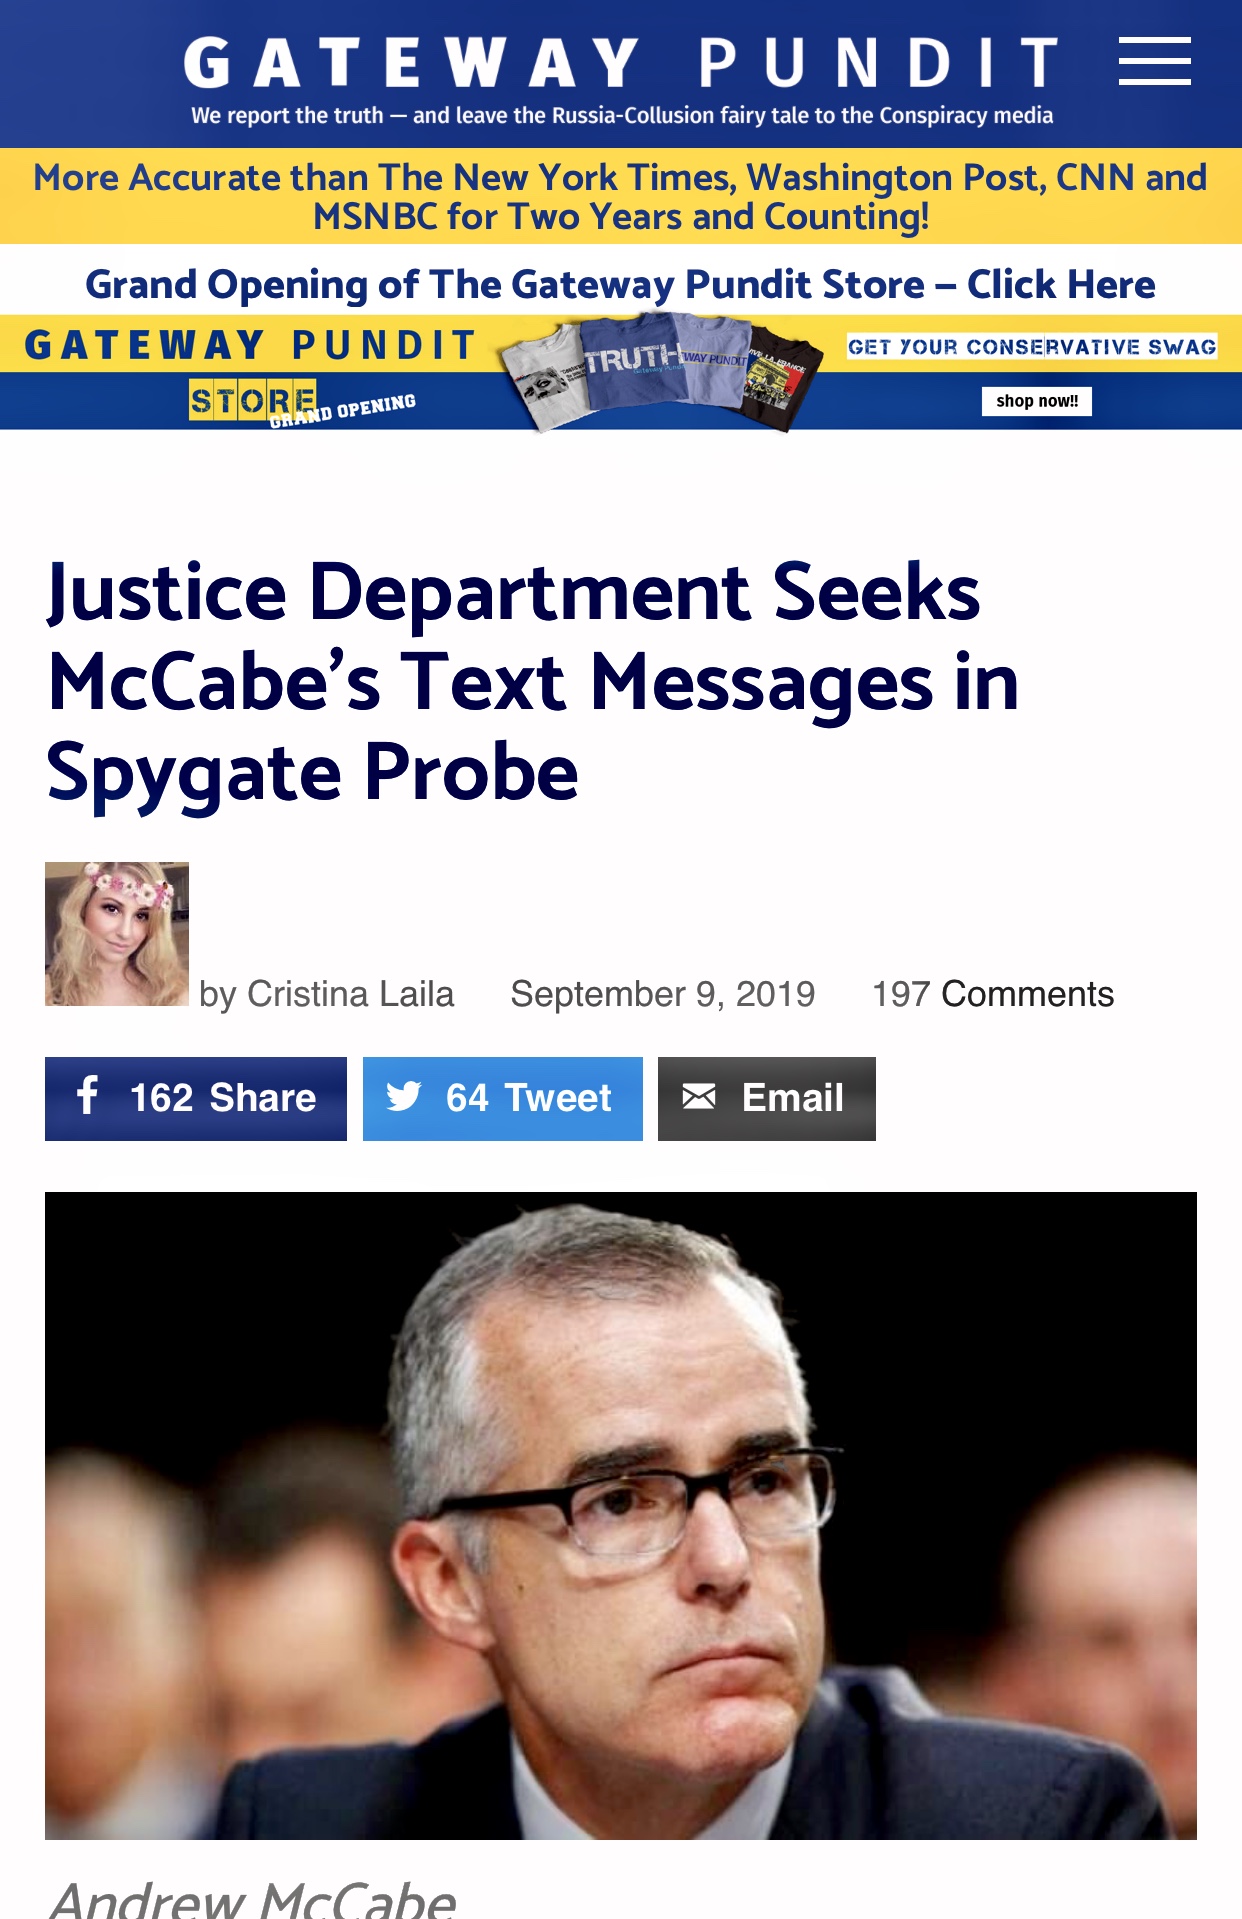 Justice Department Seeks McCabe’s Text Messages in Spygate Probe